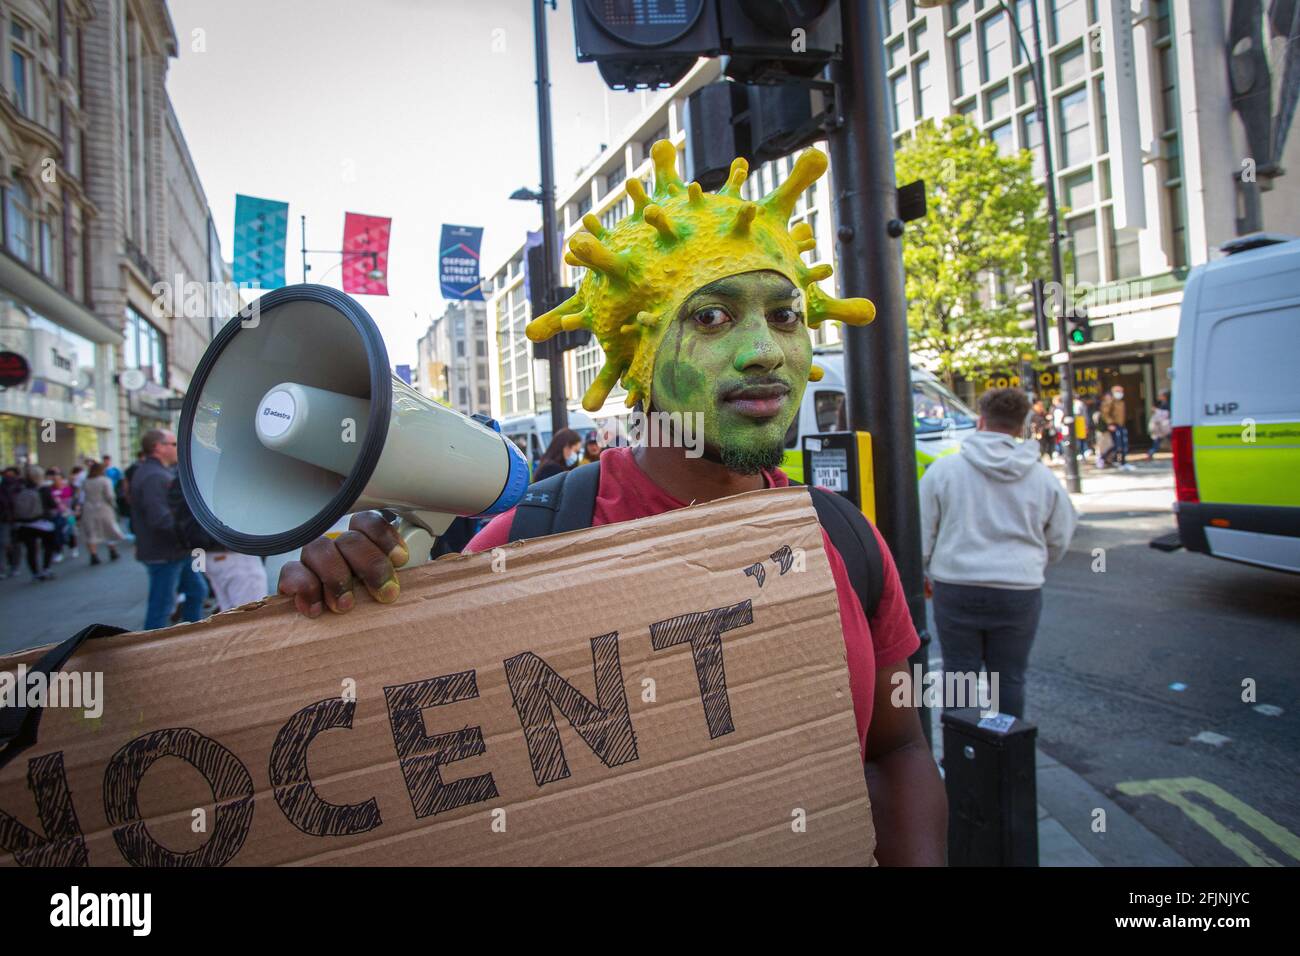 April 24, 2021, London, England, United Kingdom: A man wearing a corona virus costume as he takes part in an anti-lockdown ‘Unite for Freedom’ protest Stock Photo